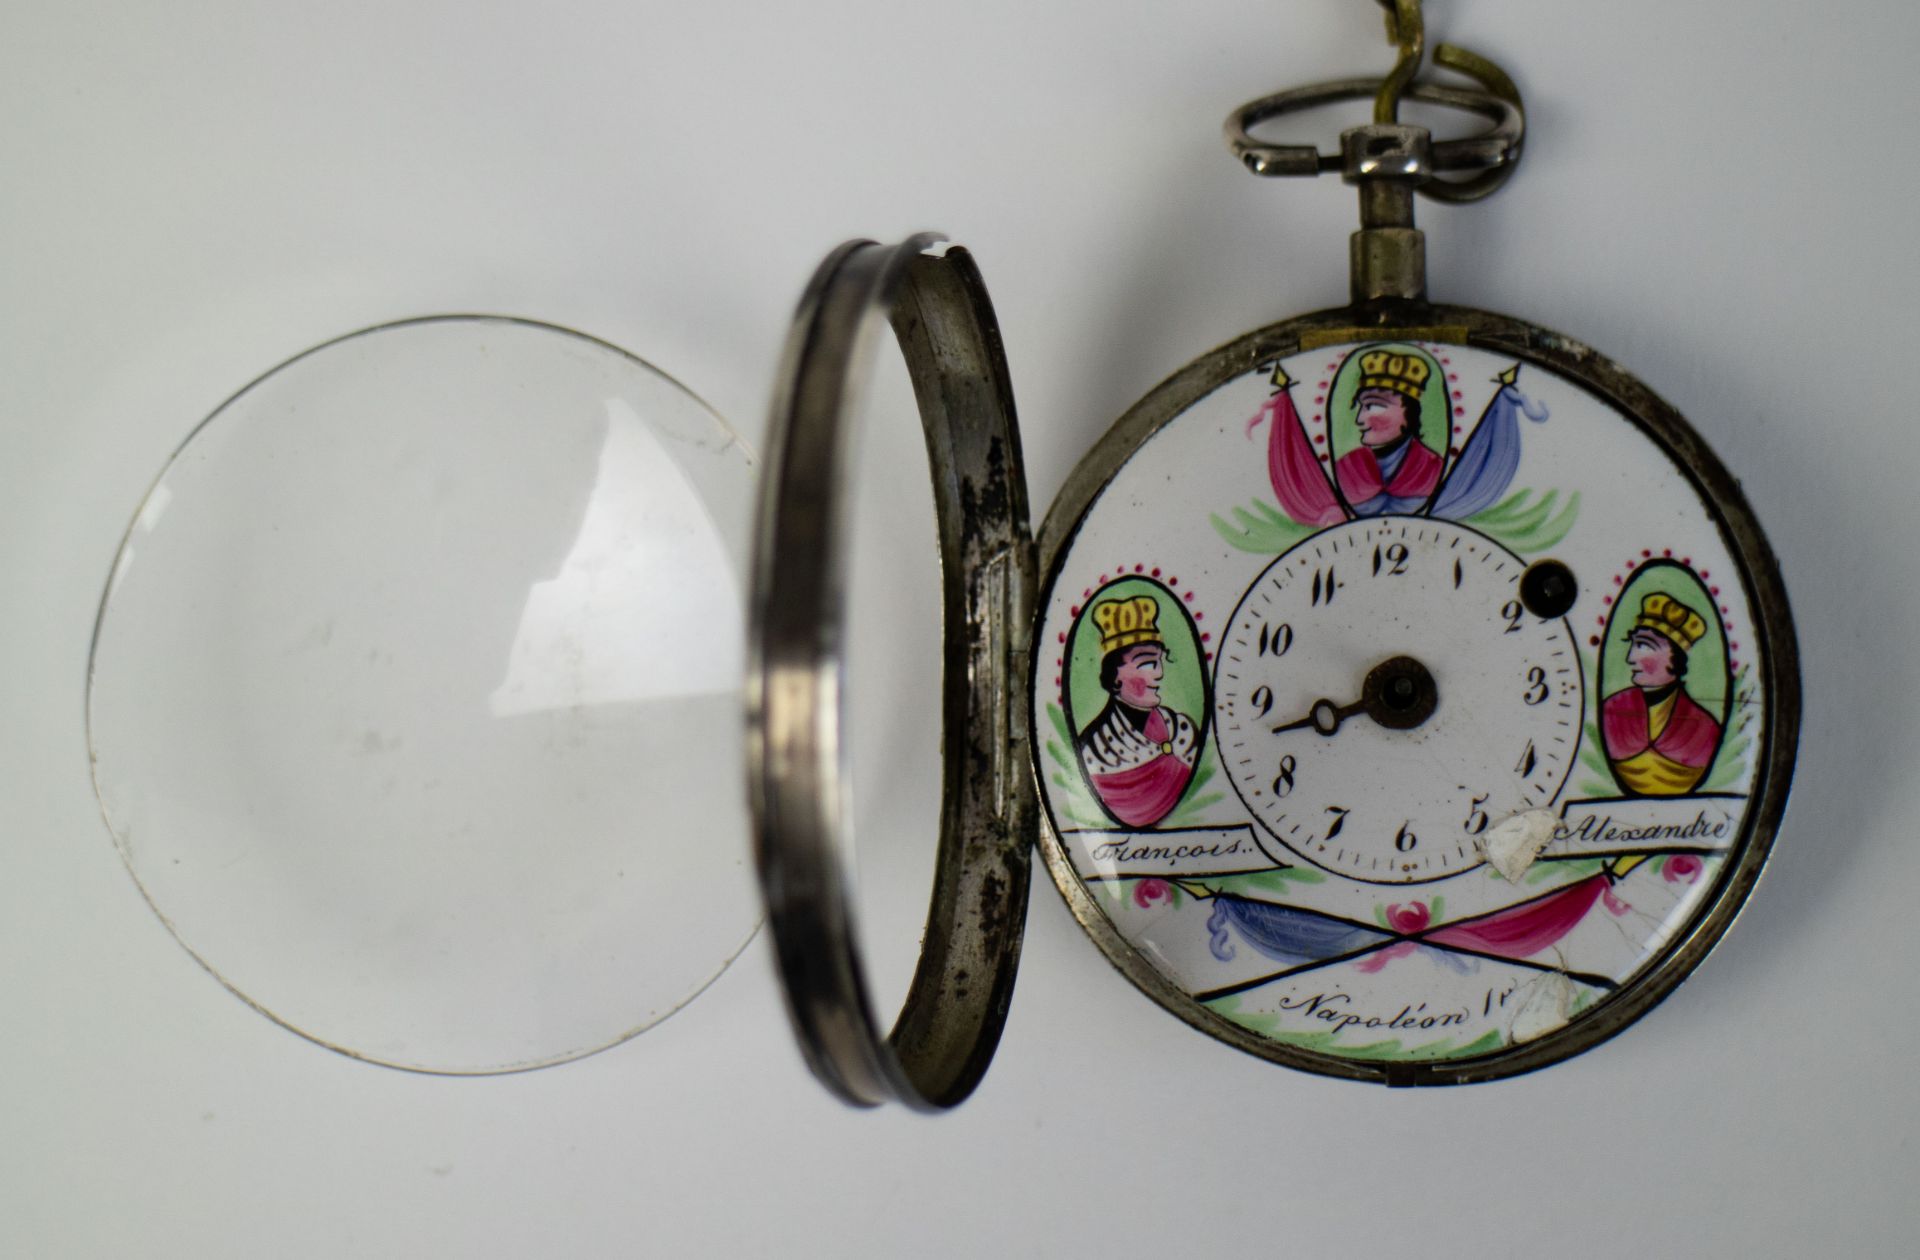 Brequet pocket watch - Image 2 of 3